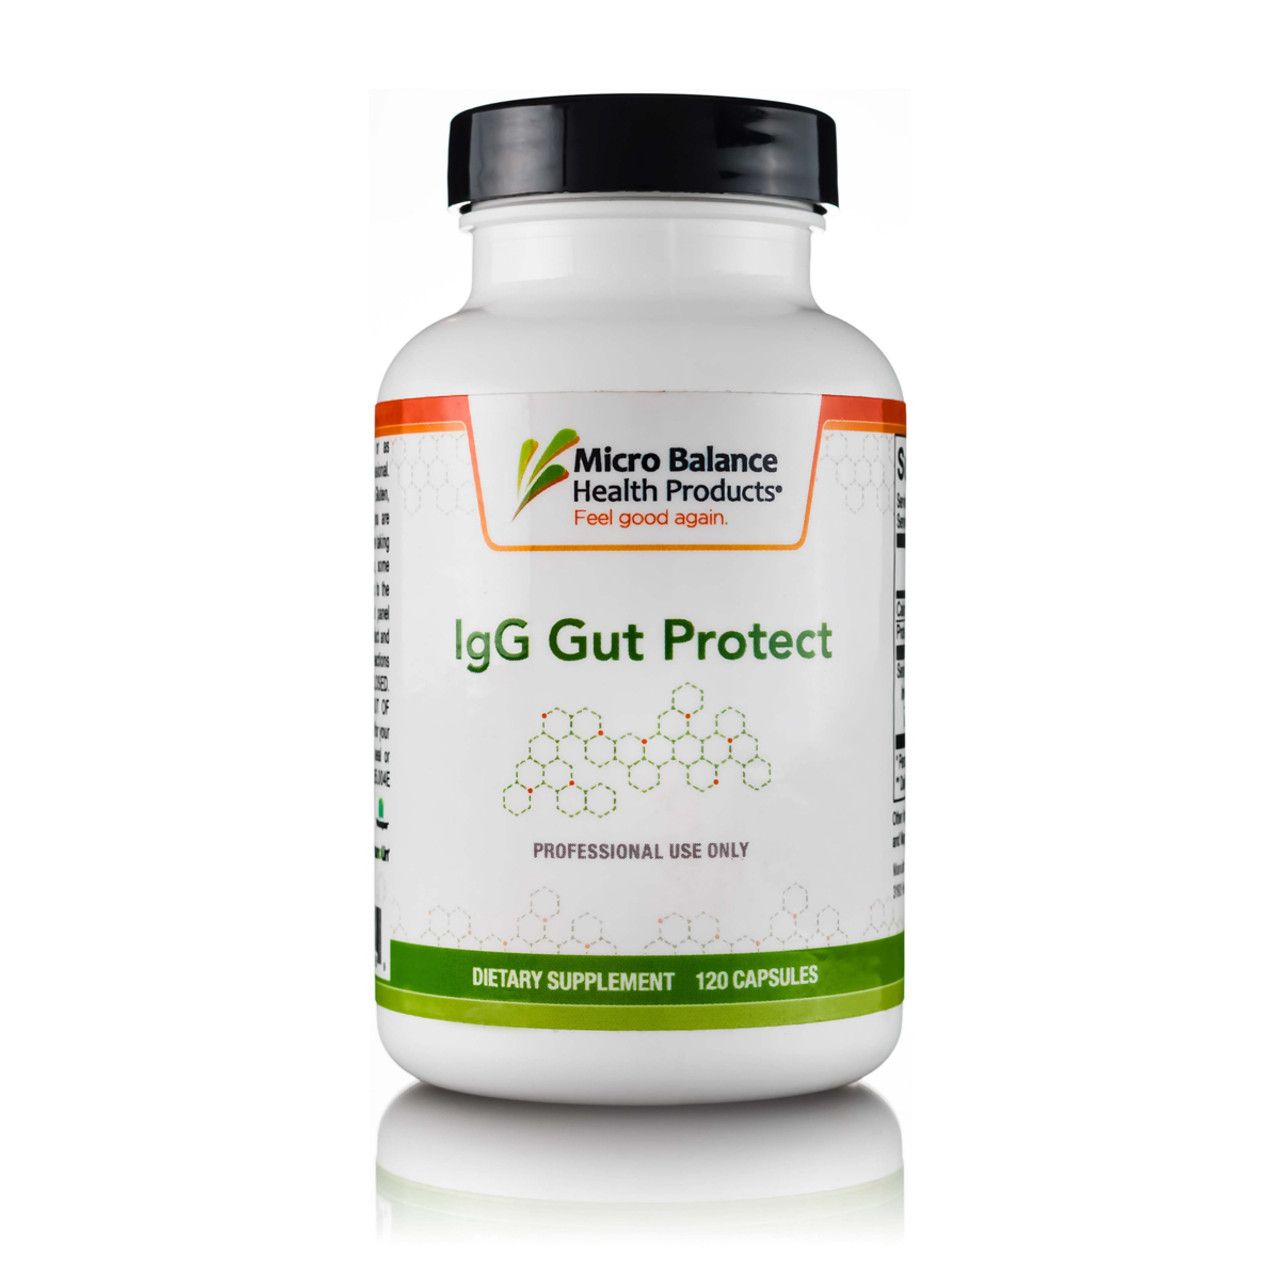 igg gut protect supplement